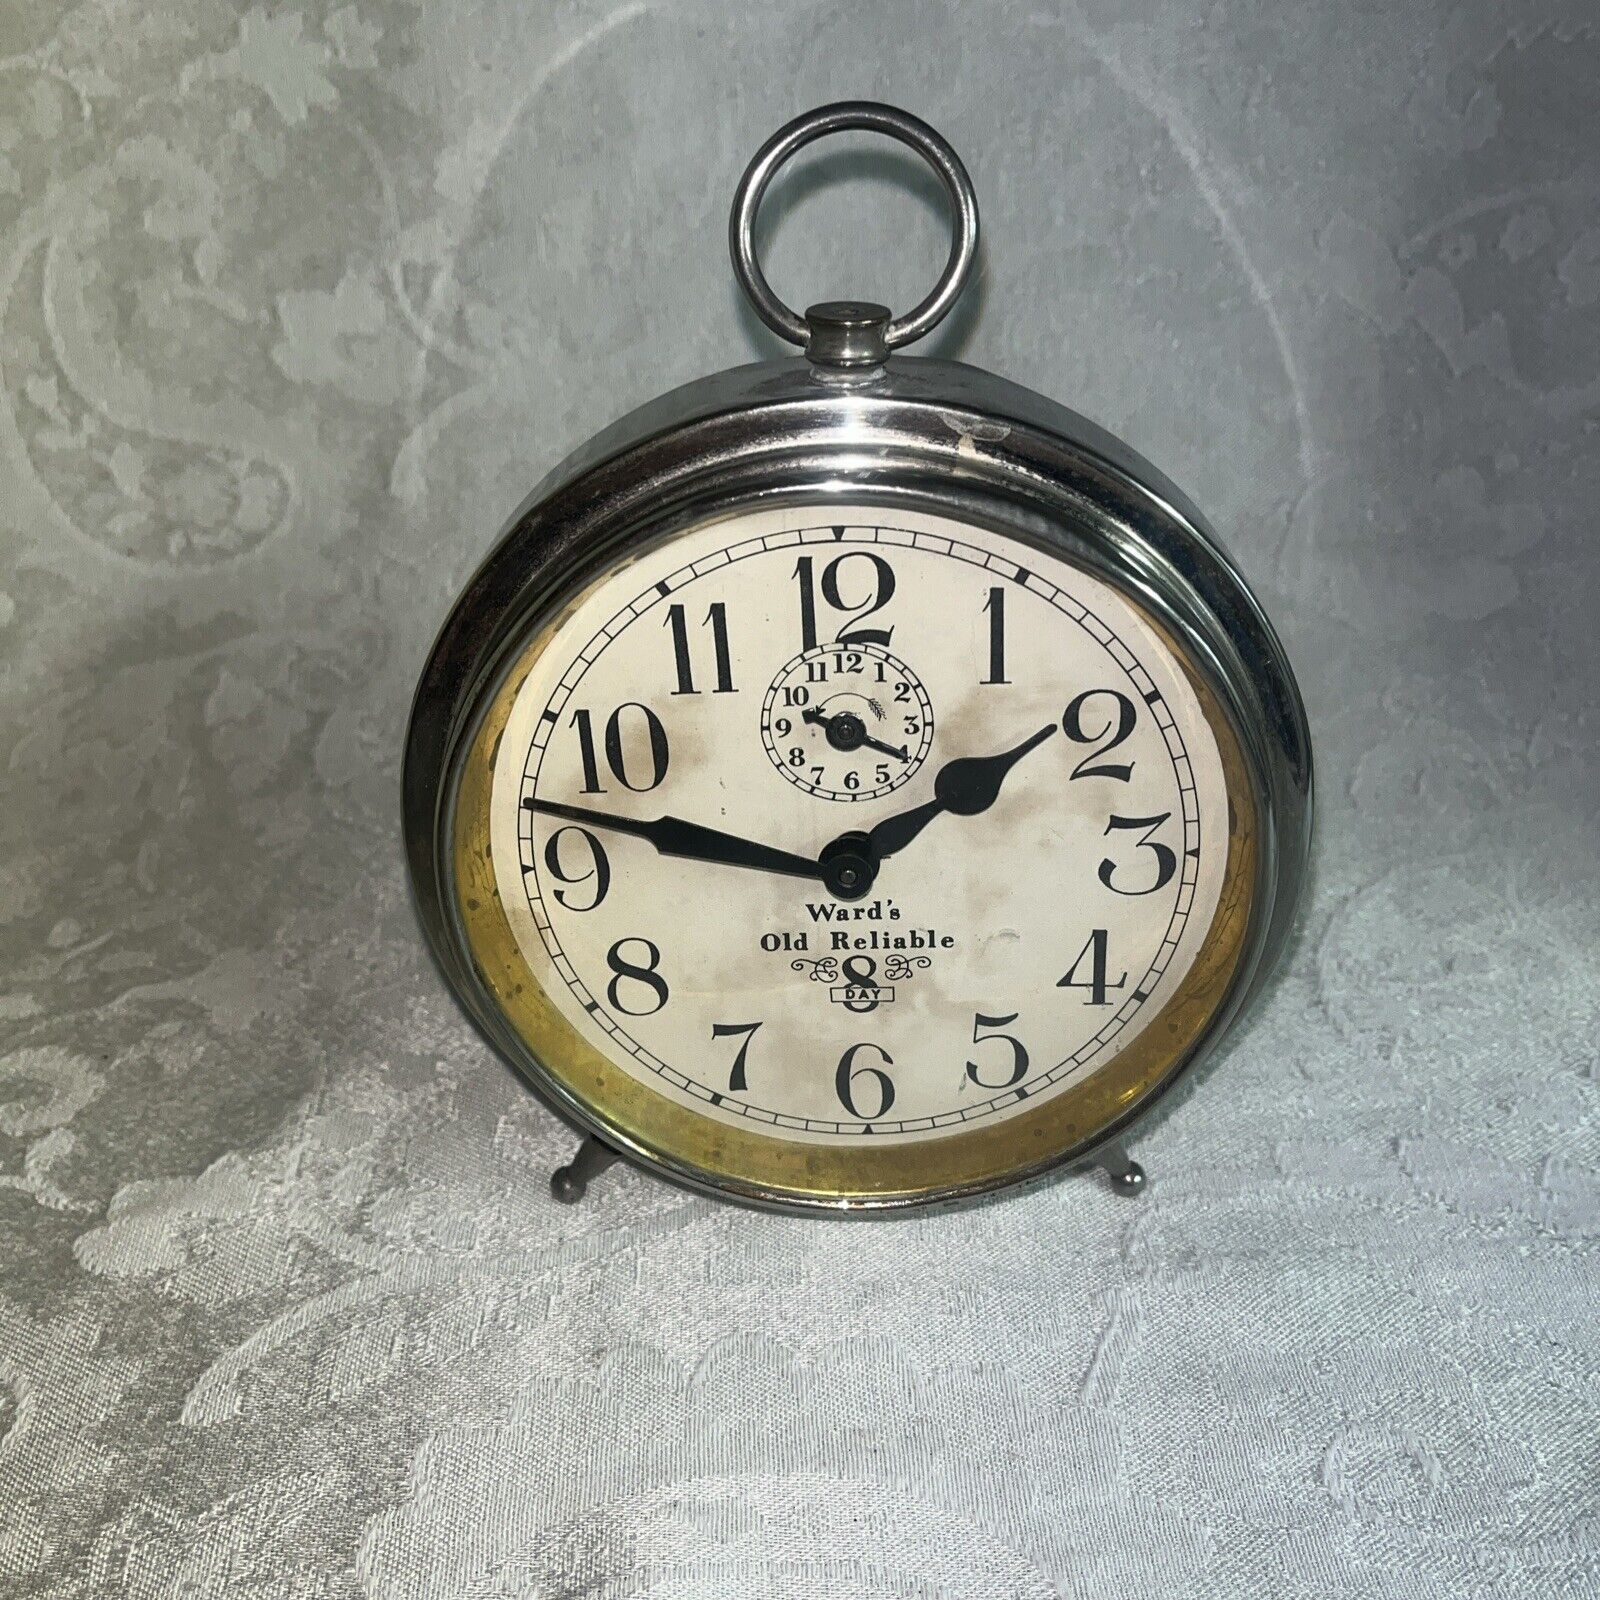 1920s Antique Nickel Ingraham Ward\'s Old Reliable 8 day Alarm Clock-Runs Strong